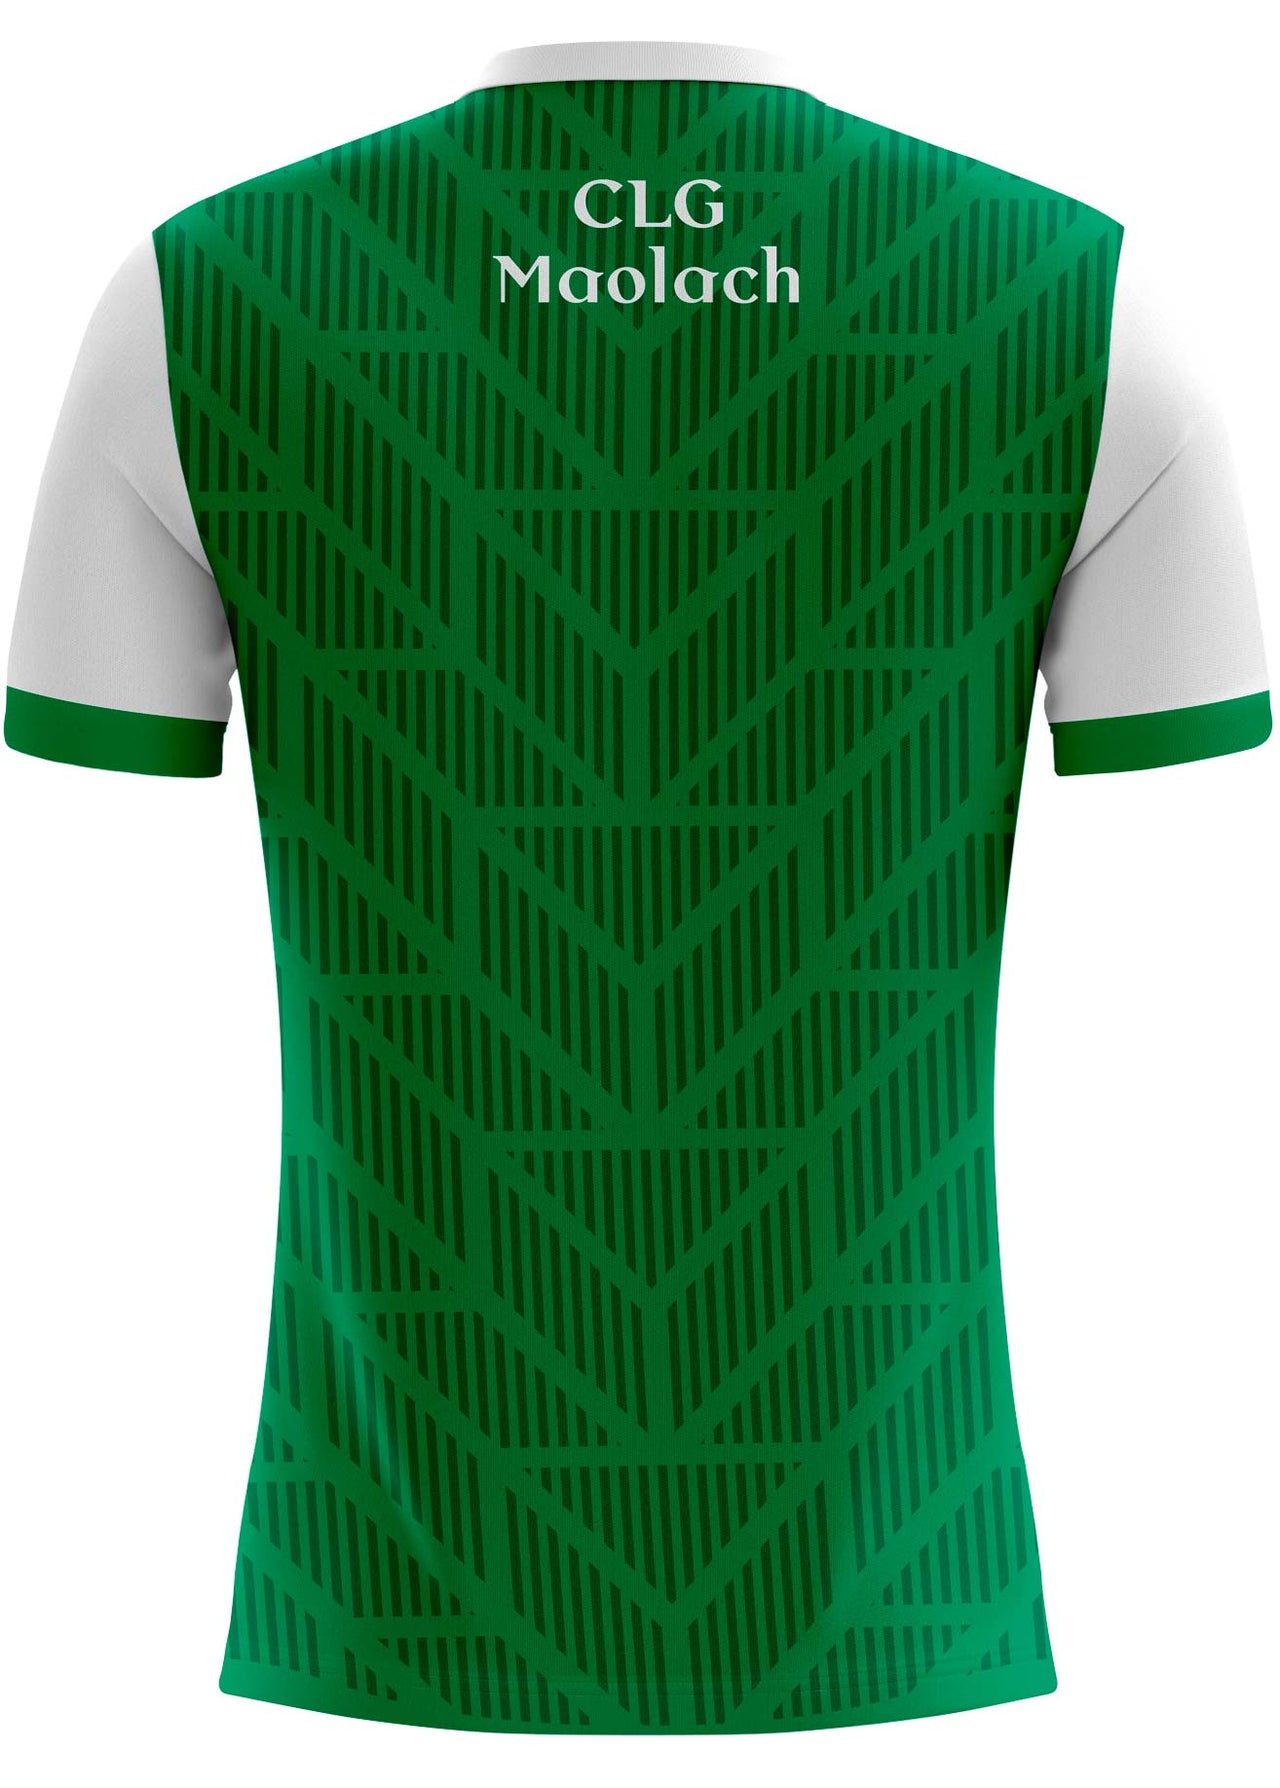 Moylagh CLG Home Jersey Kids